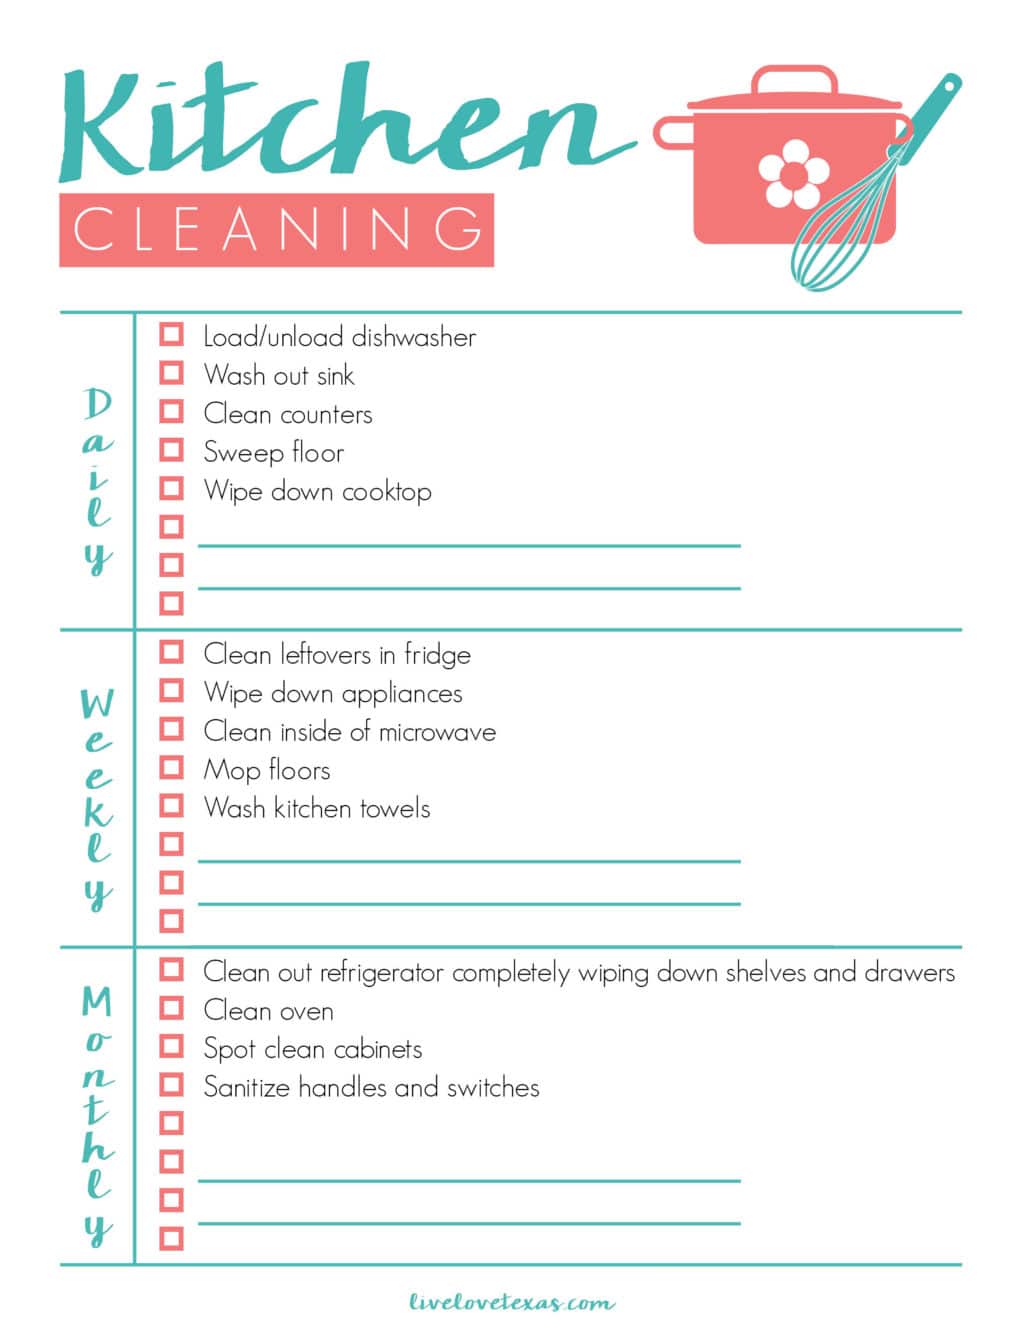 Free Kitchen Cleaning Checklist Printable {Daily, Weekly, Monthly}